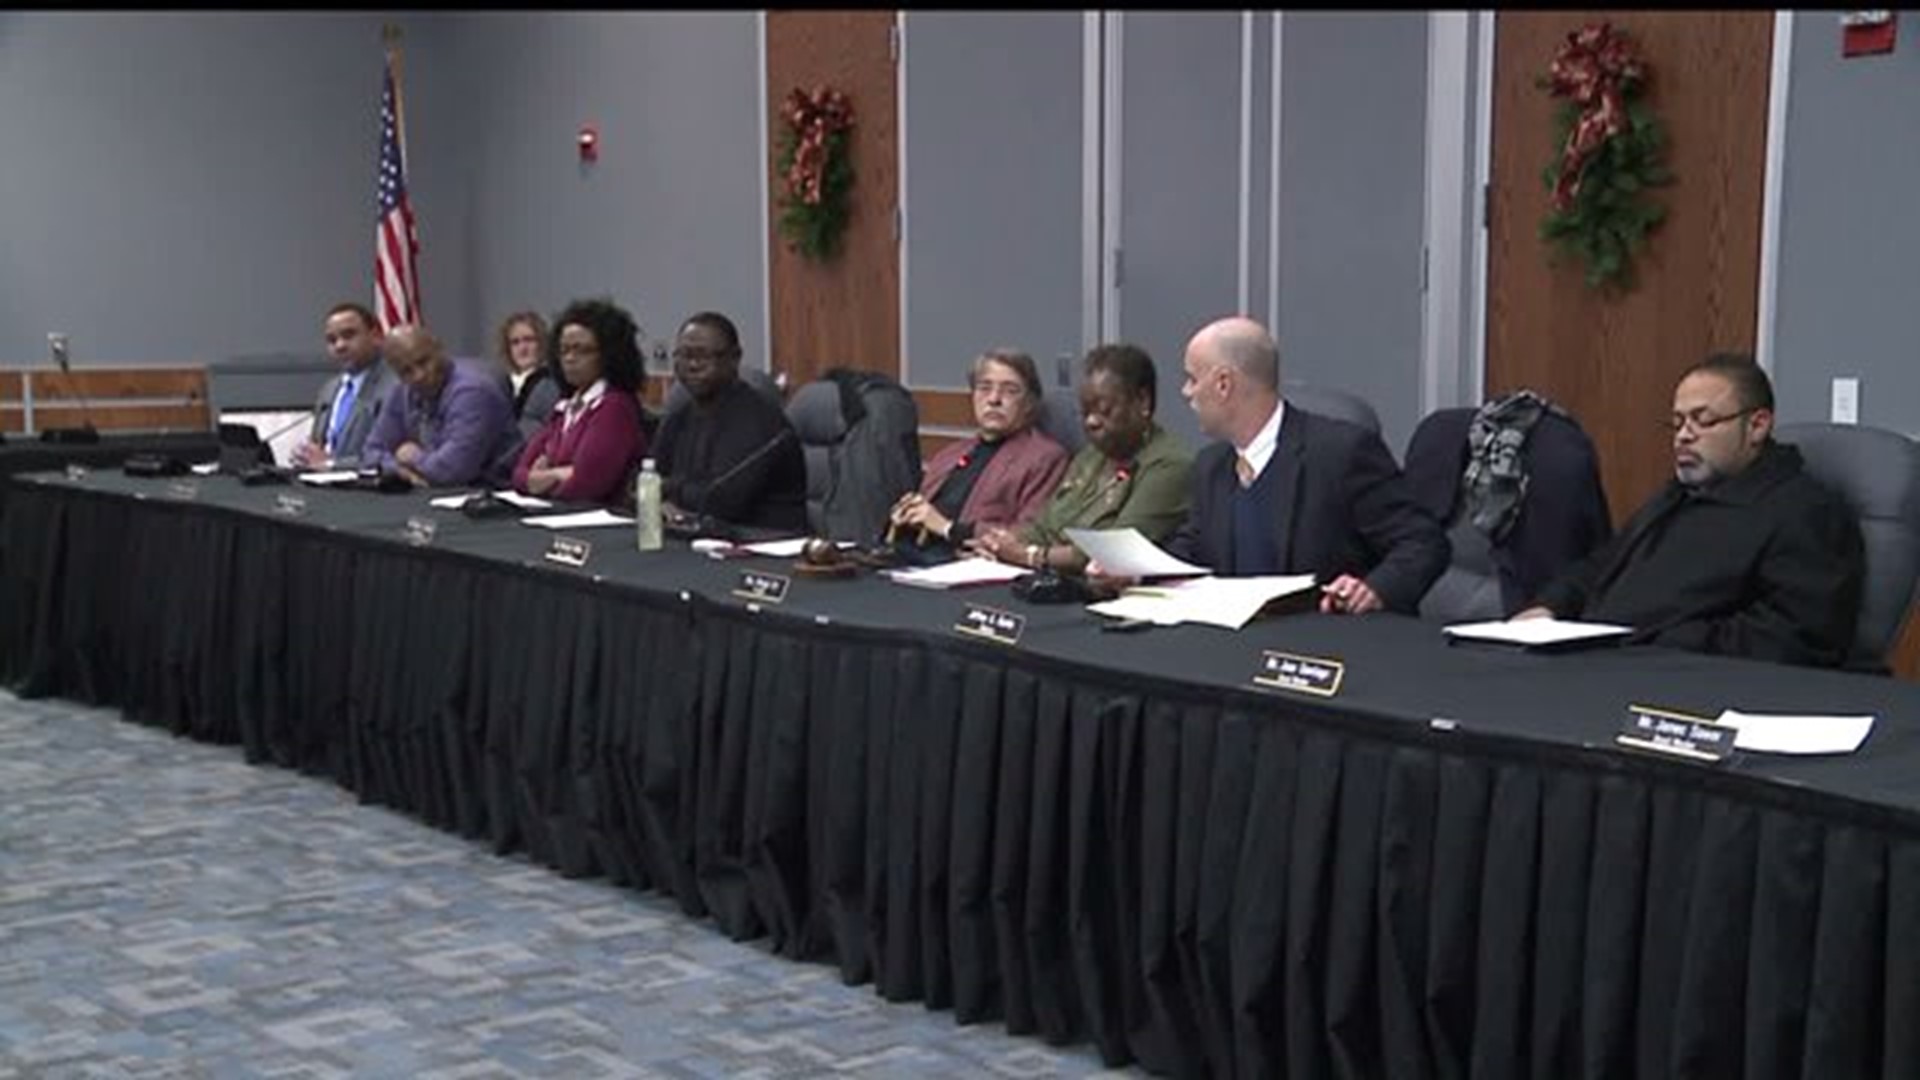 Board Votes to Move Appeal Forward